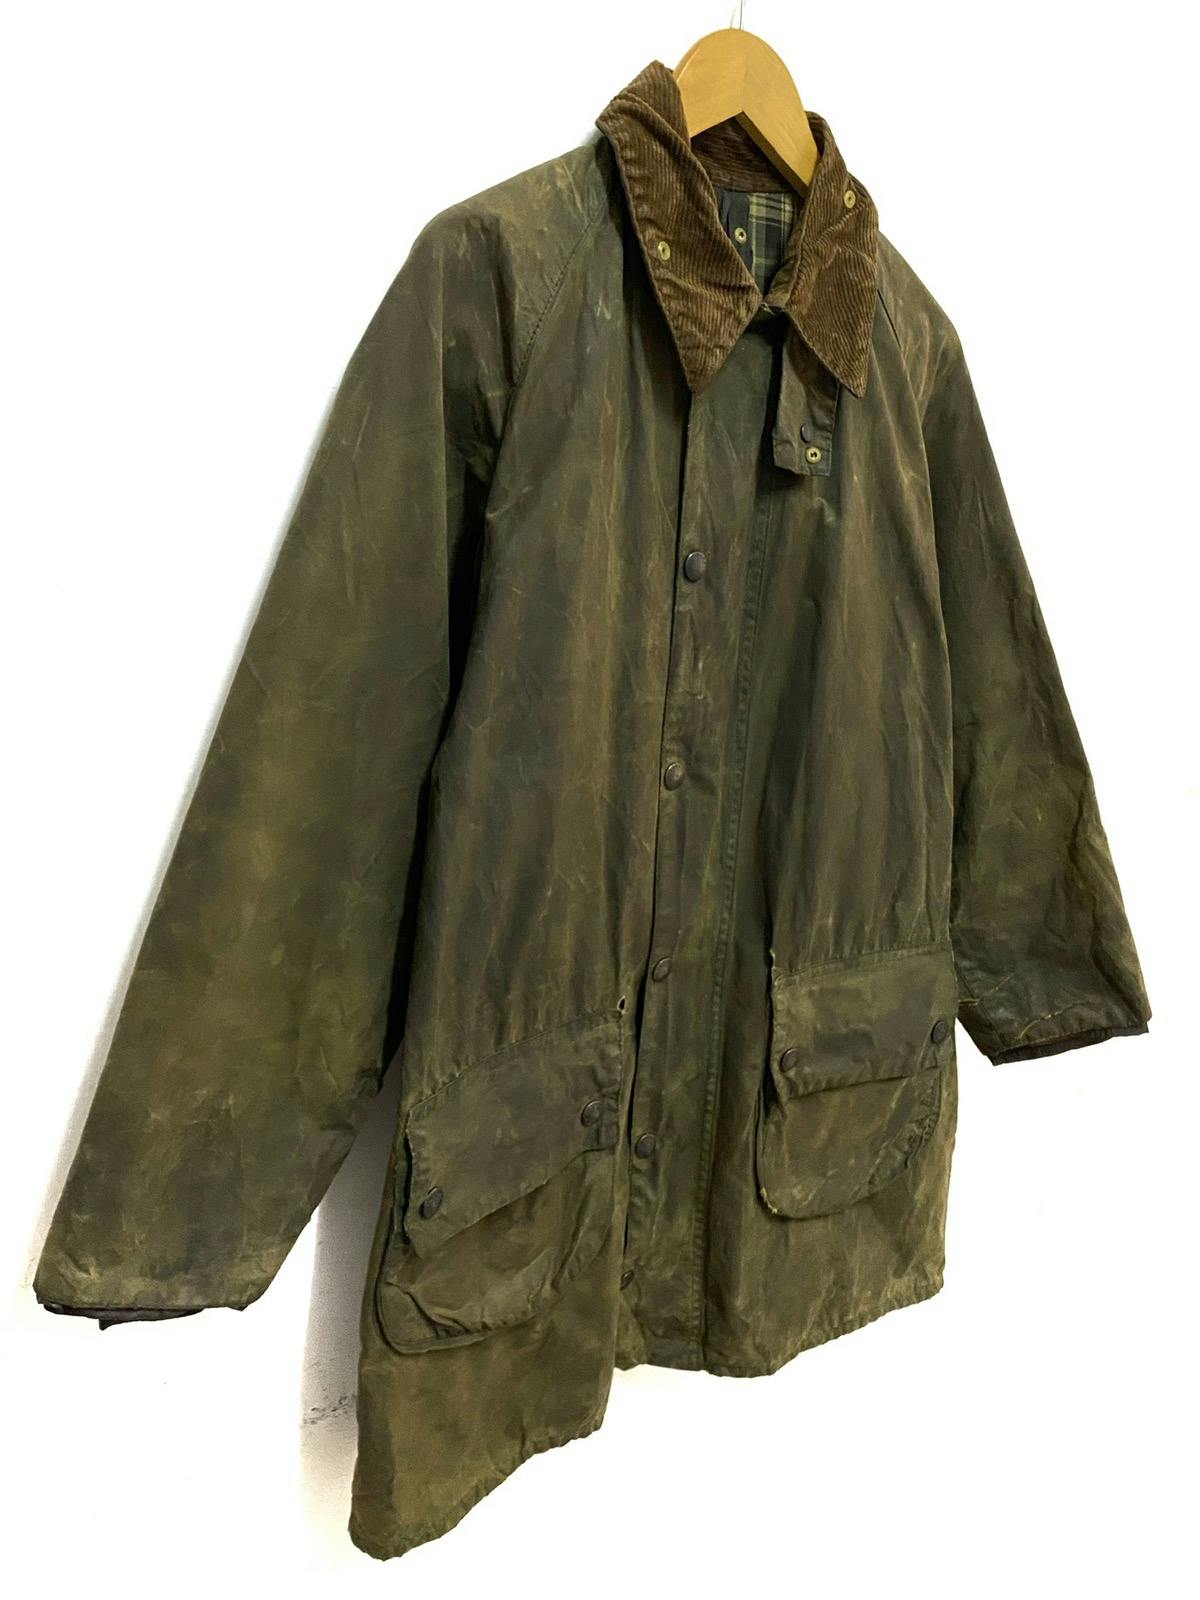 Barbour Gamefair Waxed Jacket Made in England - 4